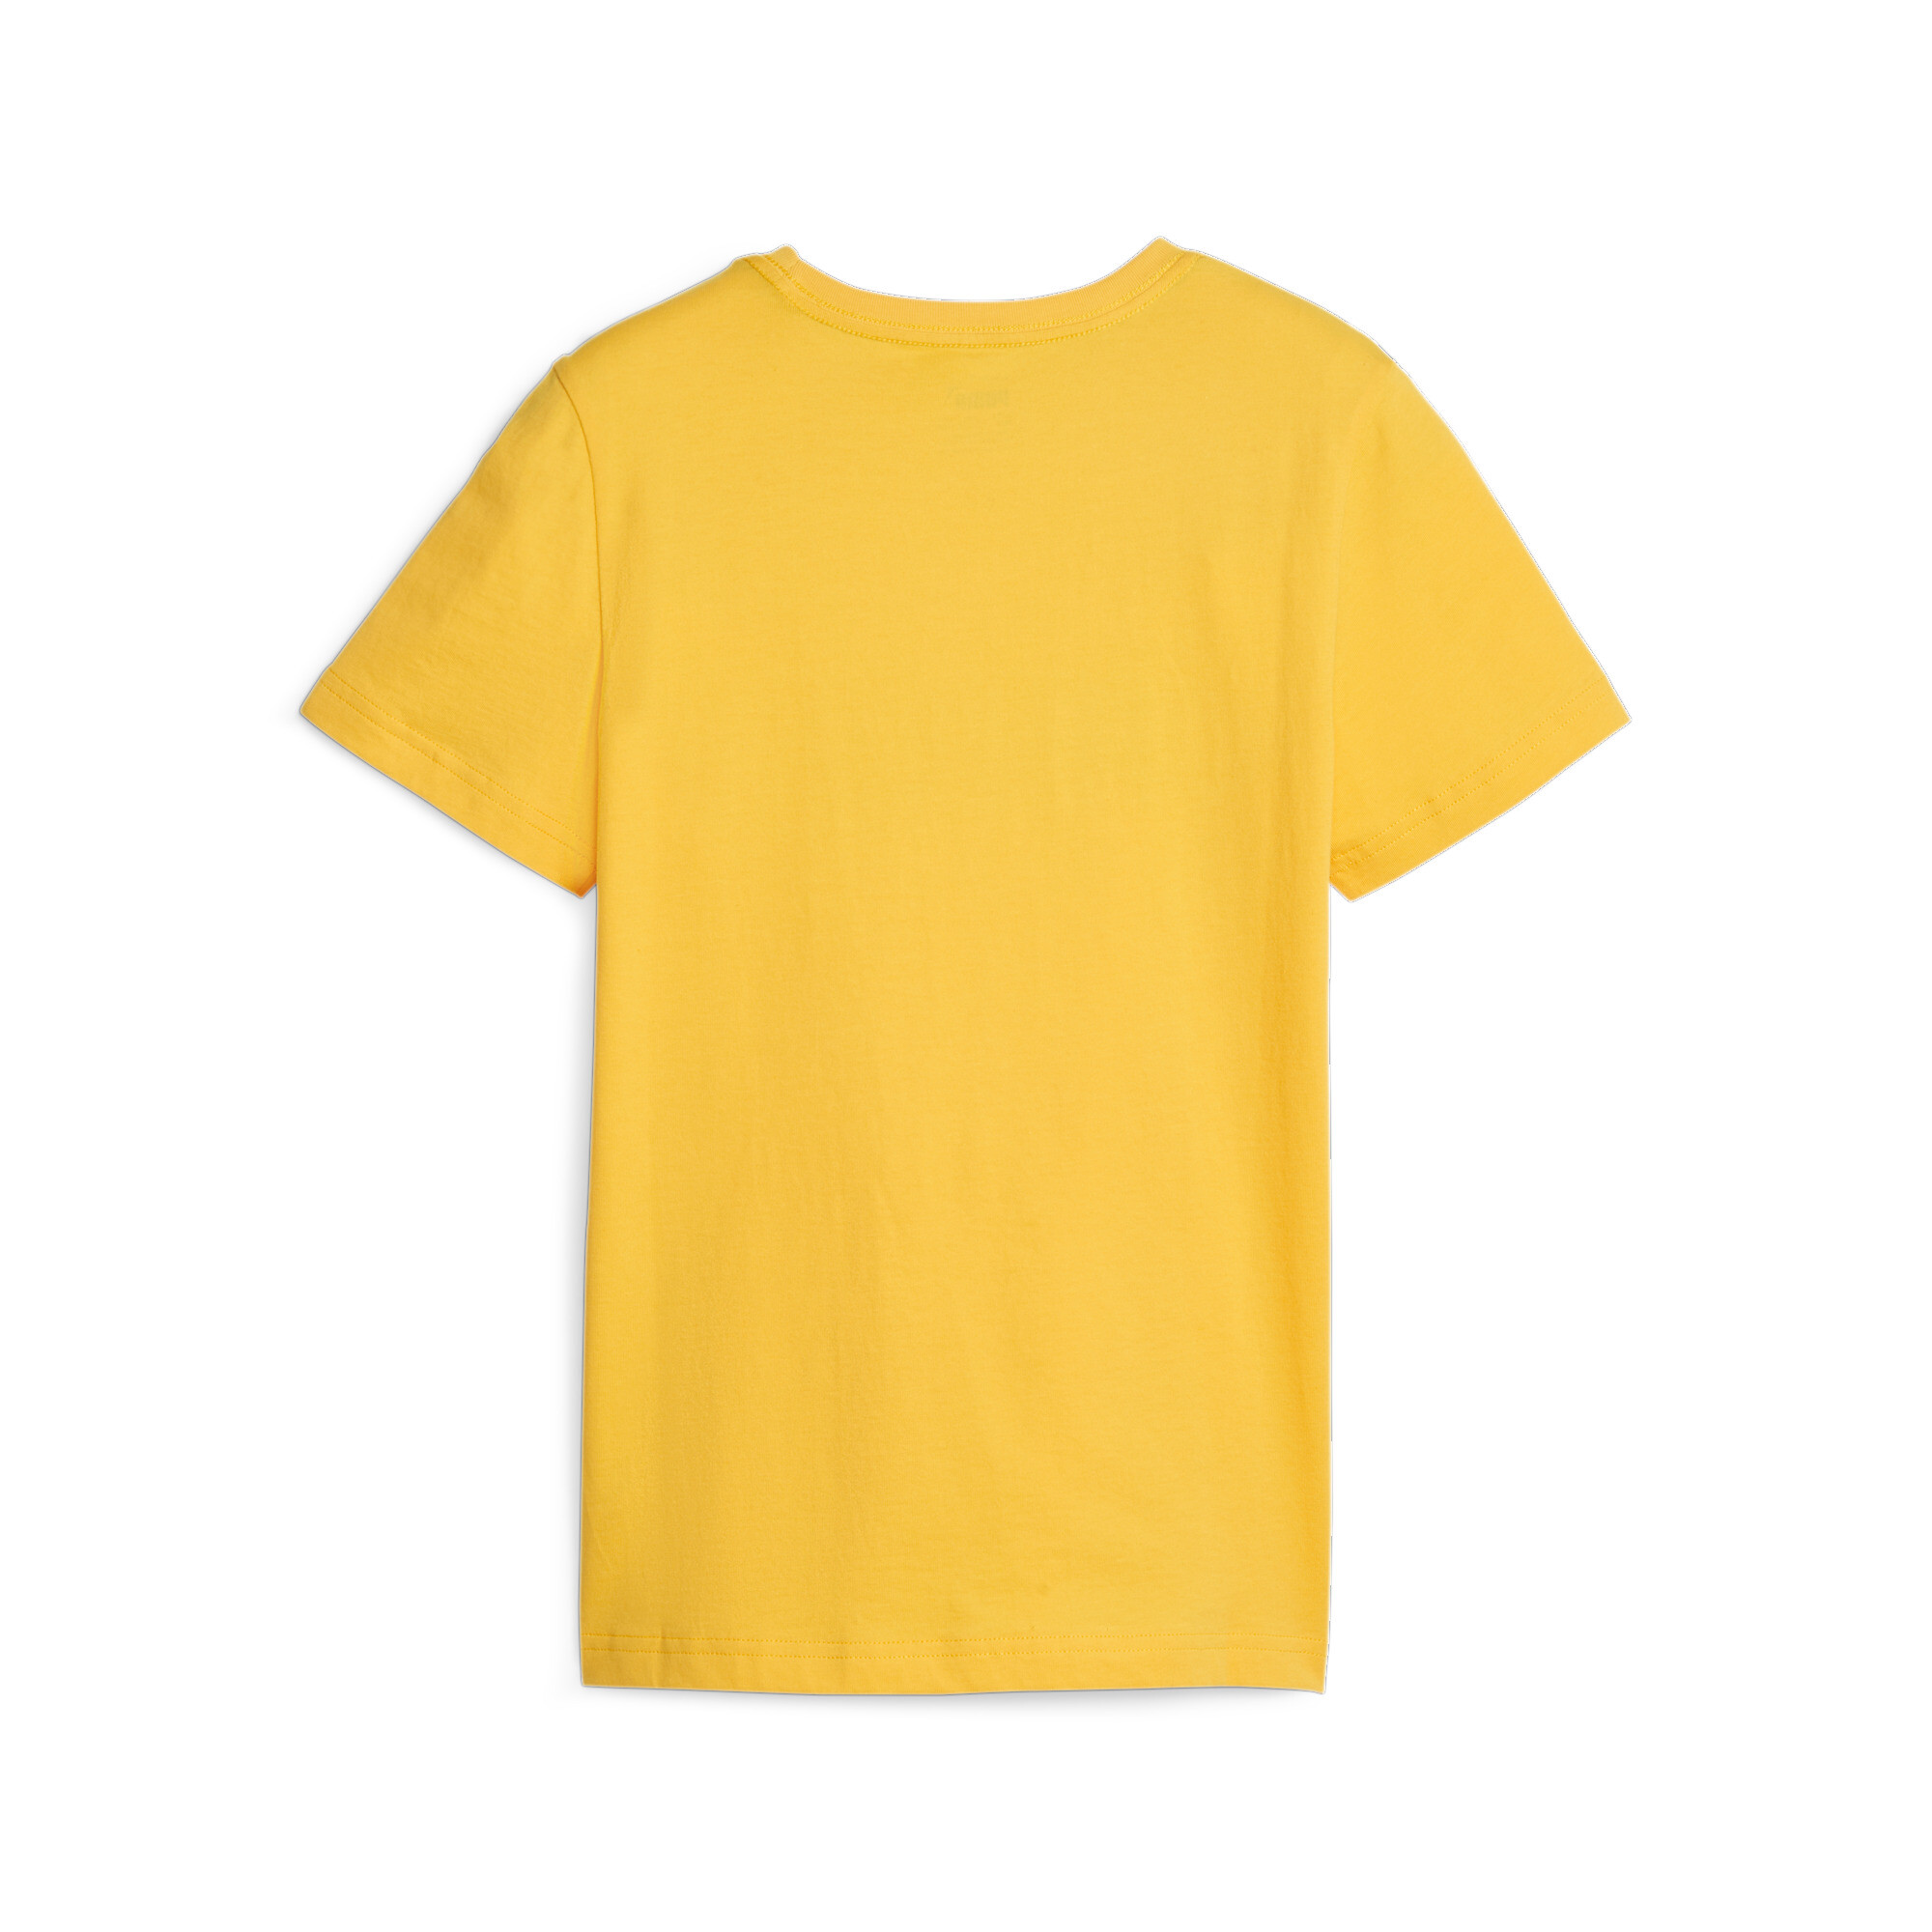 Men's Puma Essentials+ Two-Tone Logo Youth T-Shirt, Yellow, Size 13-14Y, Clothing